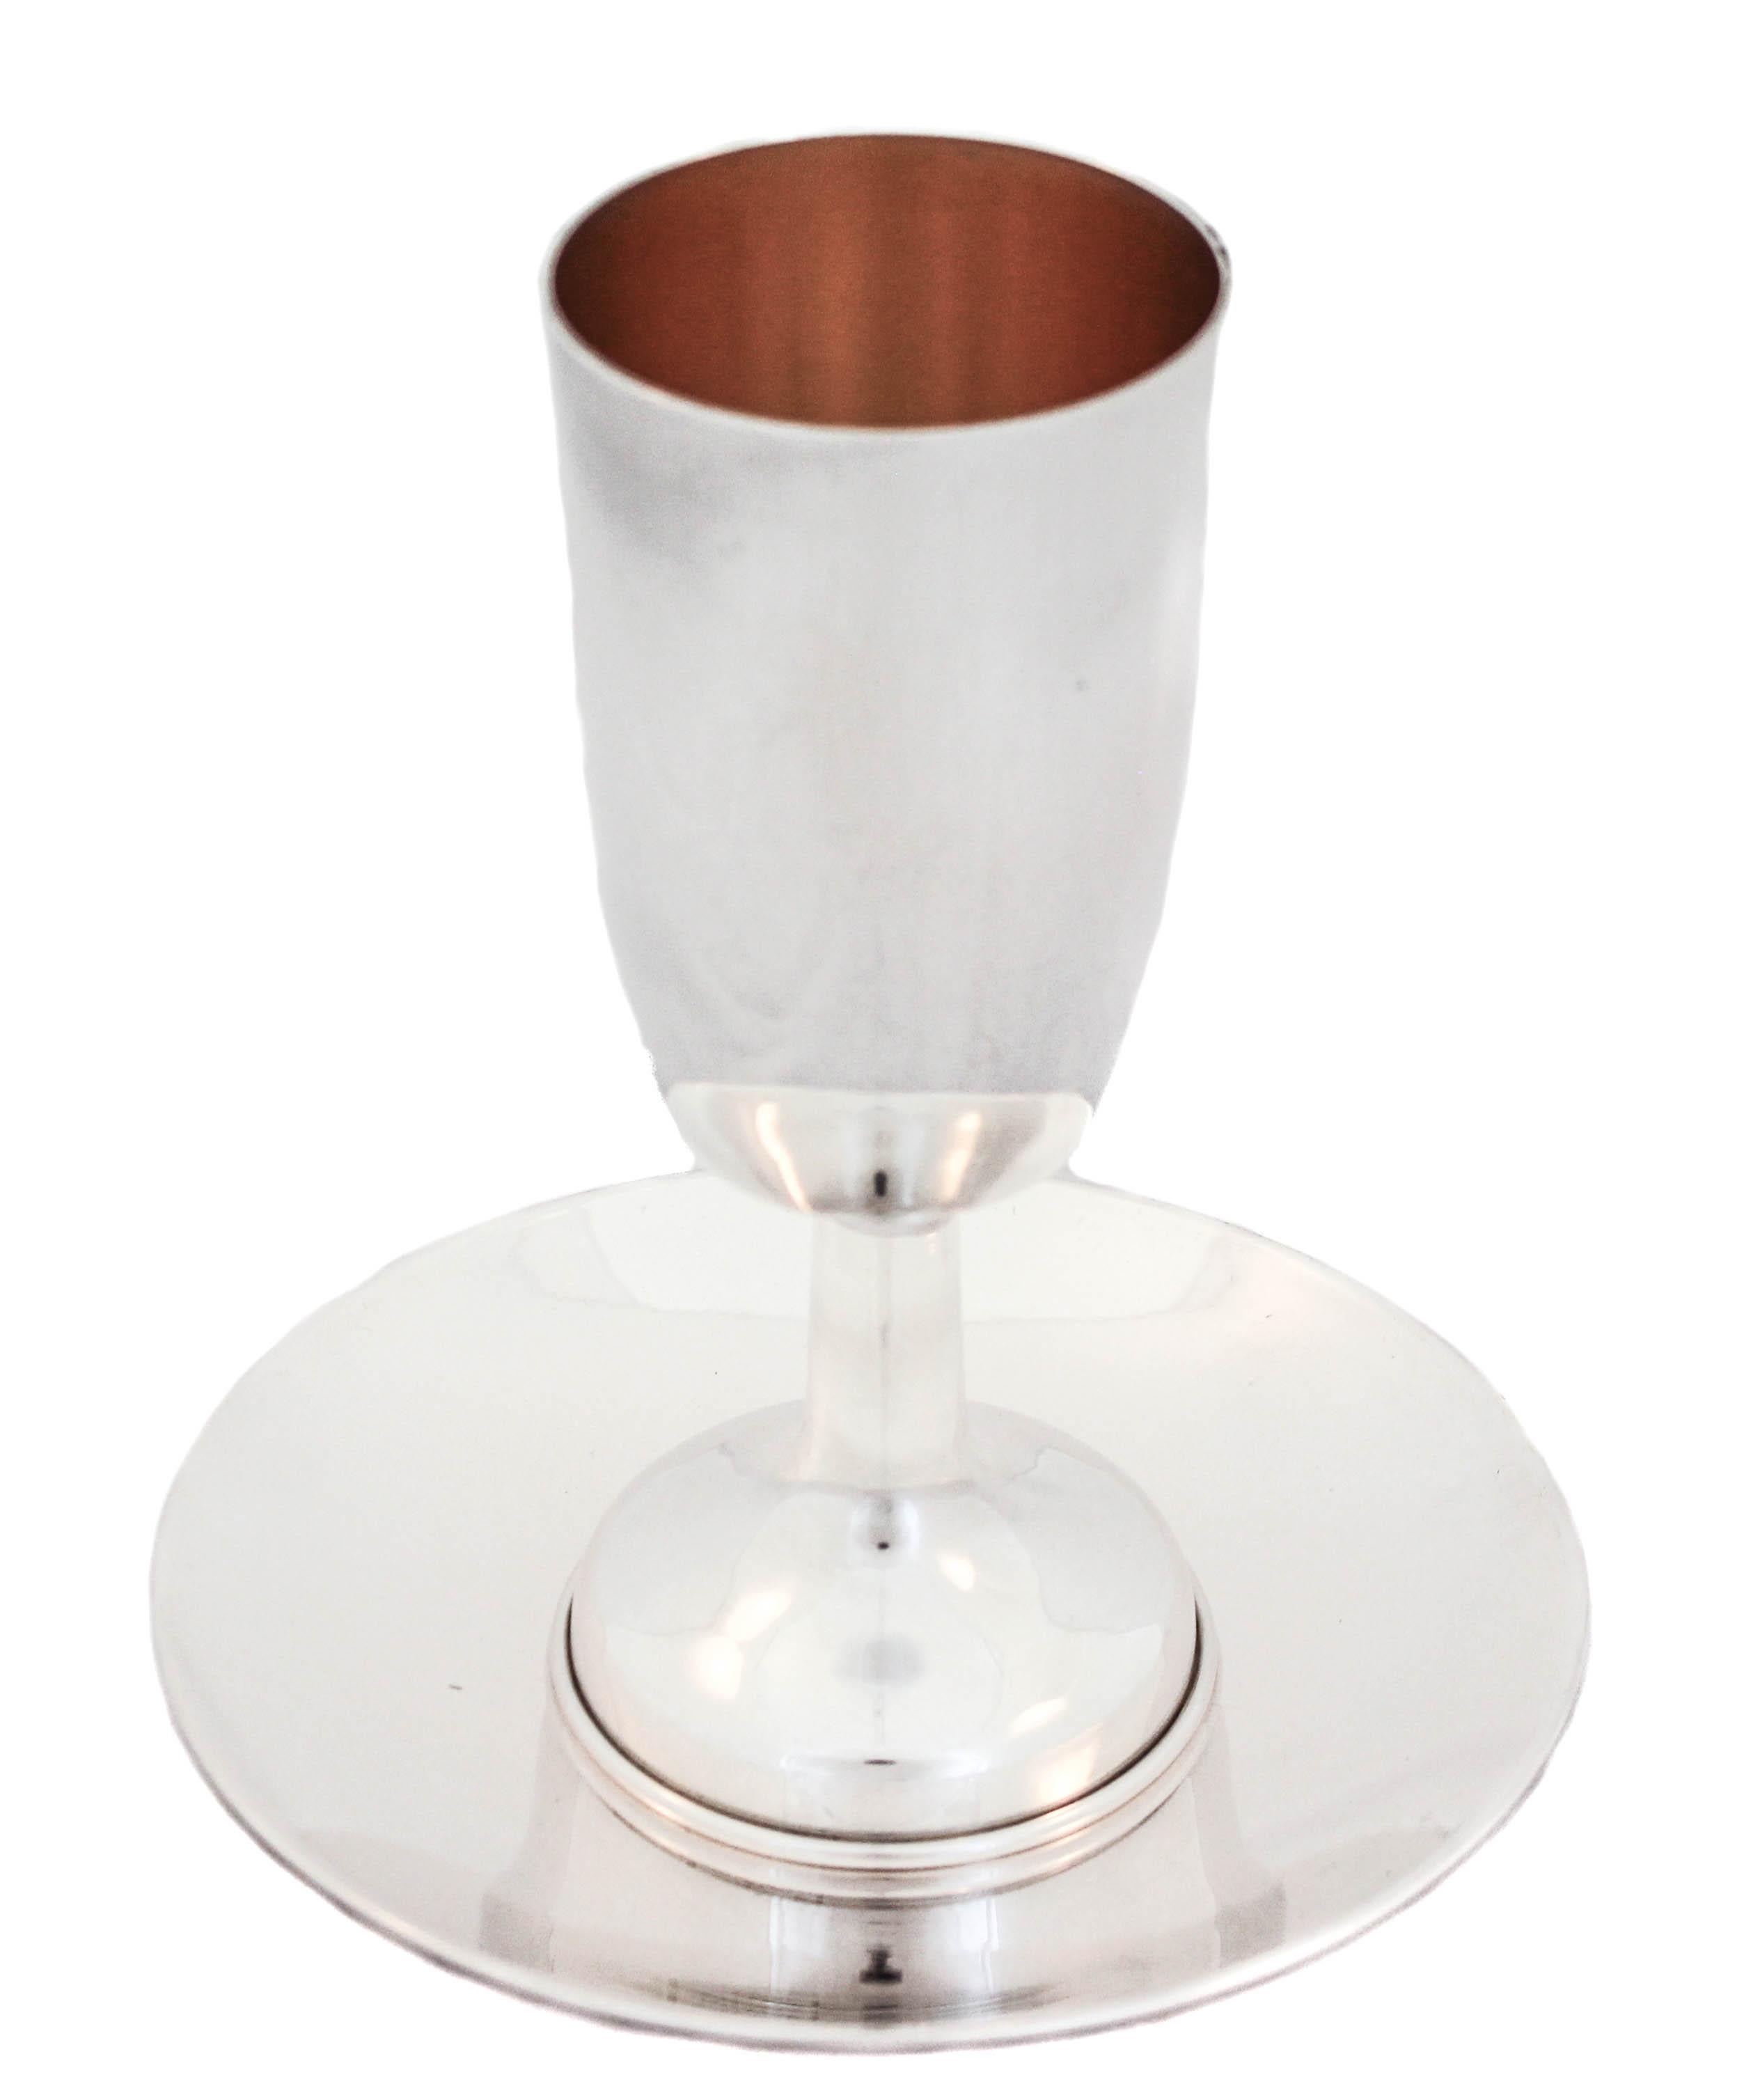 A sterling silver Kiddush cup (goblet) and plate, manufactured in Israel. Uber modern and sleek this set is beautiful for a groom or newlywed couple. It’s new but has a Mid-Century look.